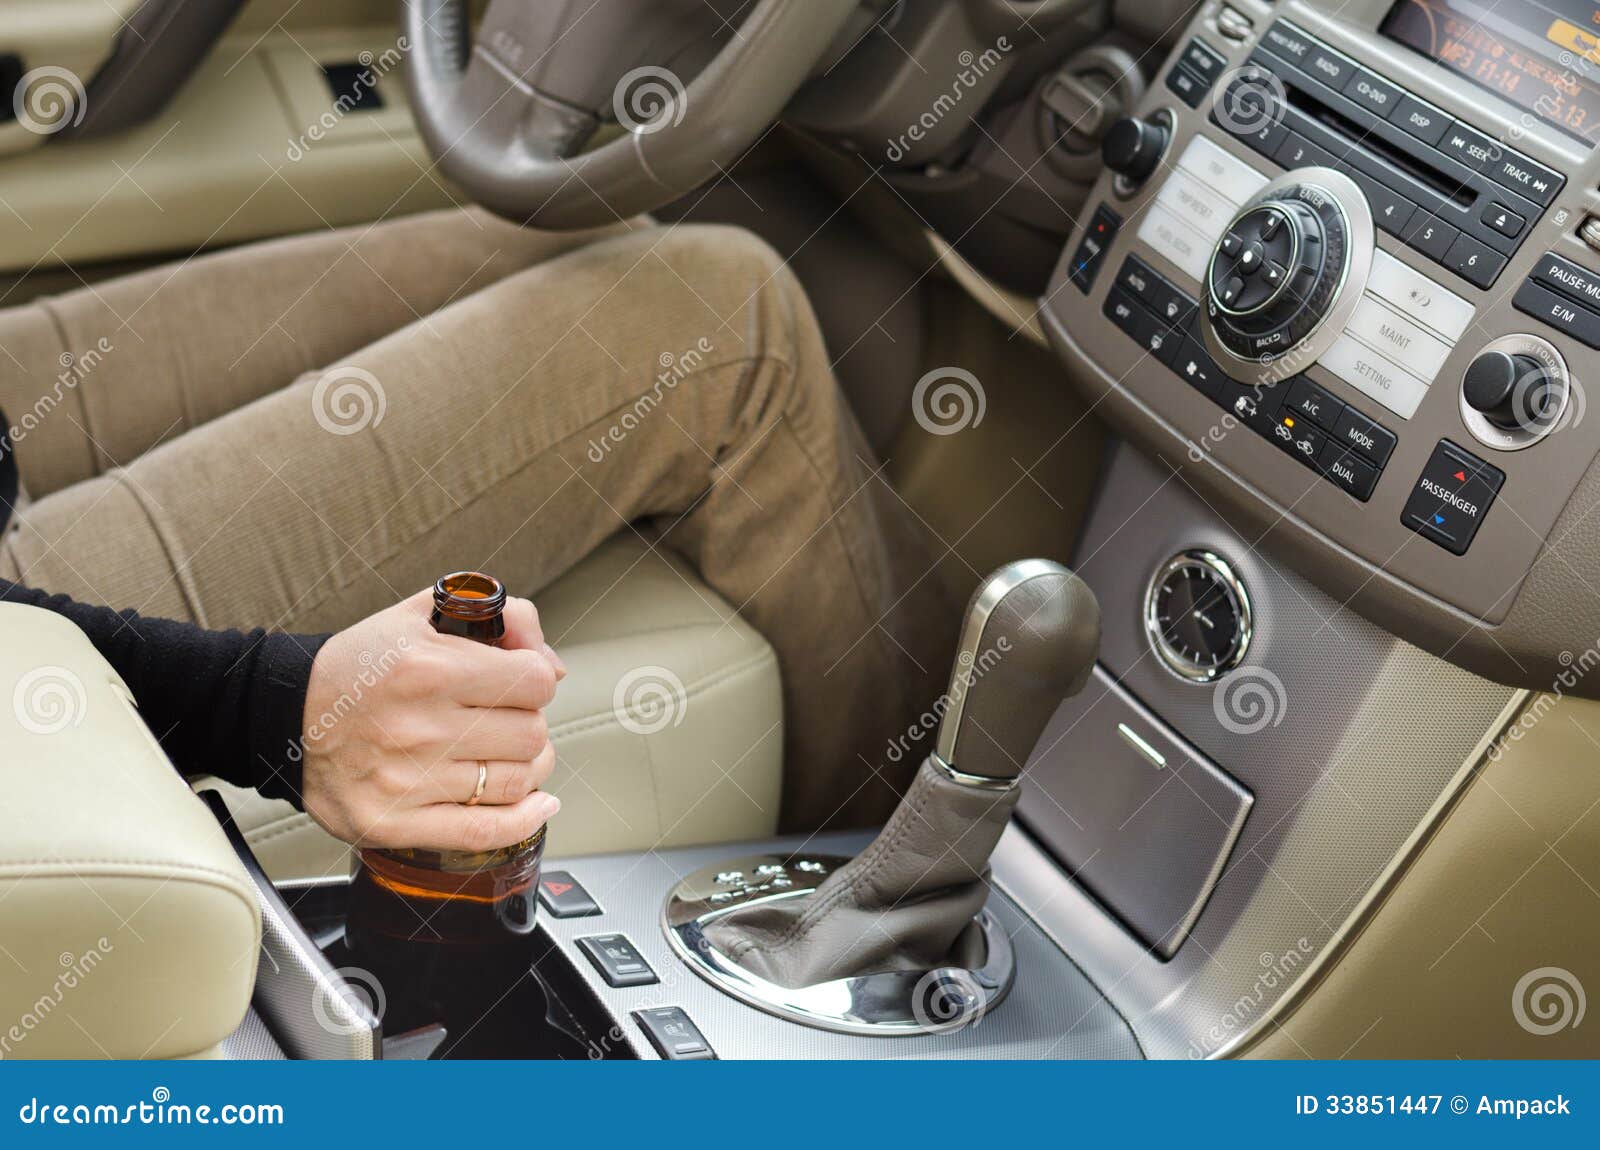 woman alcoholic with a bottle of booze in the car